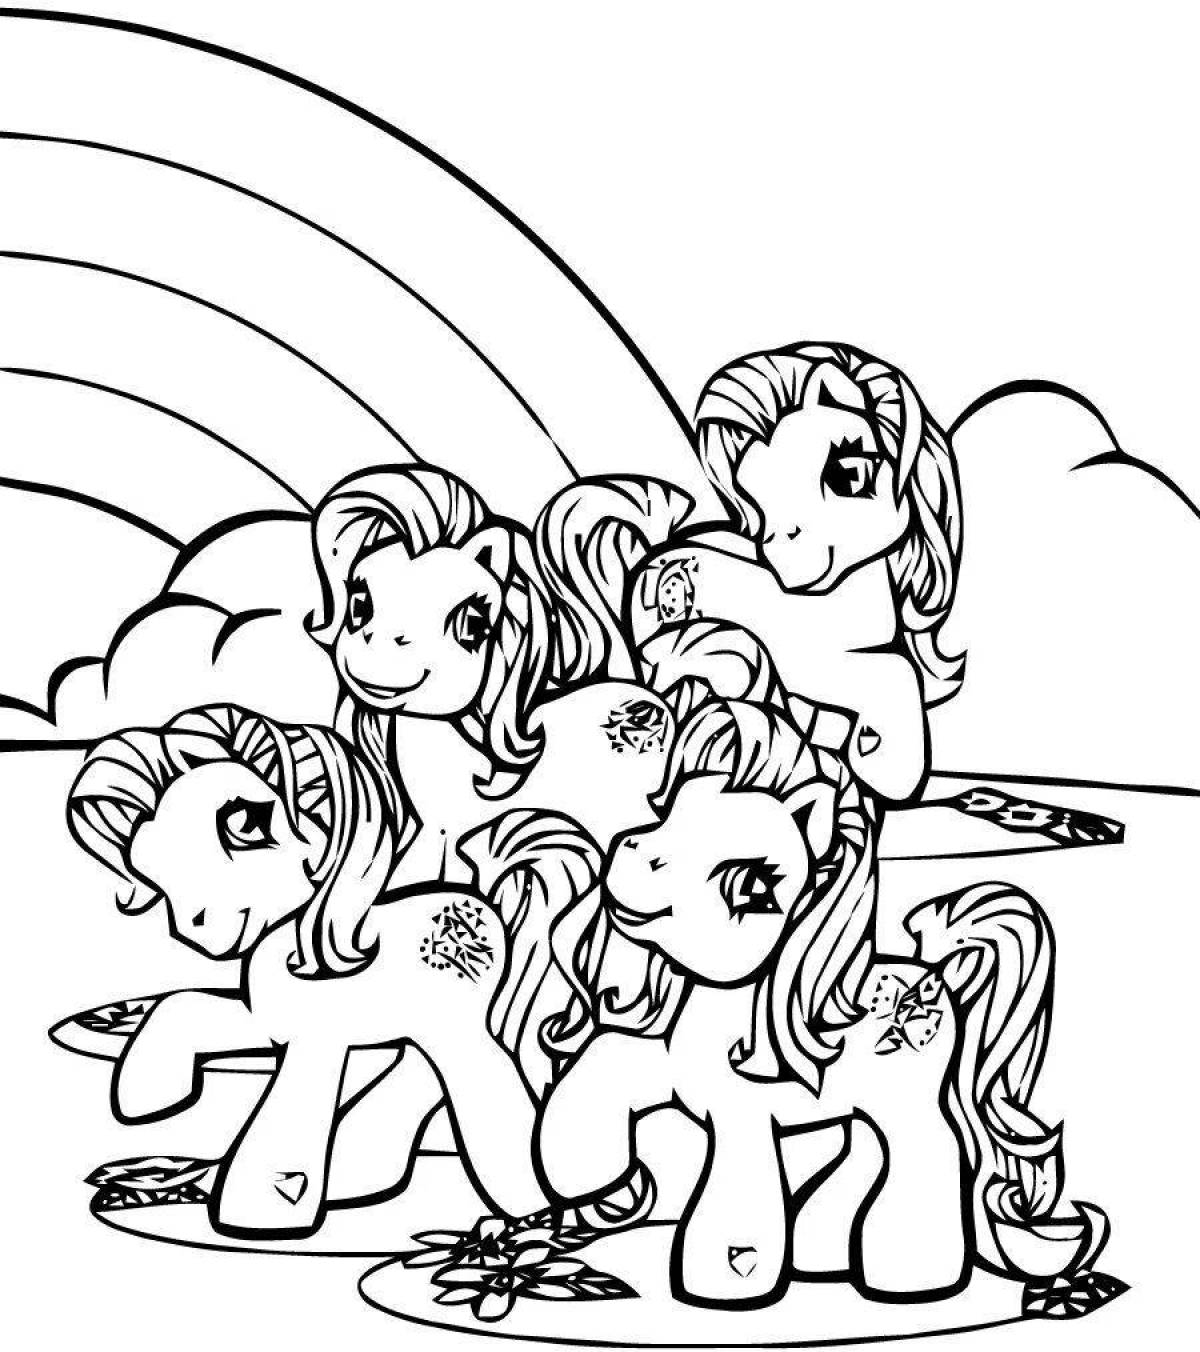 Fancy my little pony coloring book